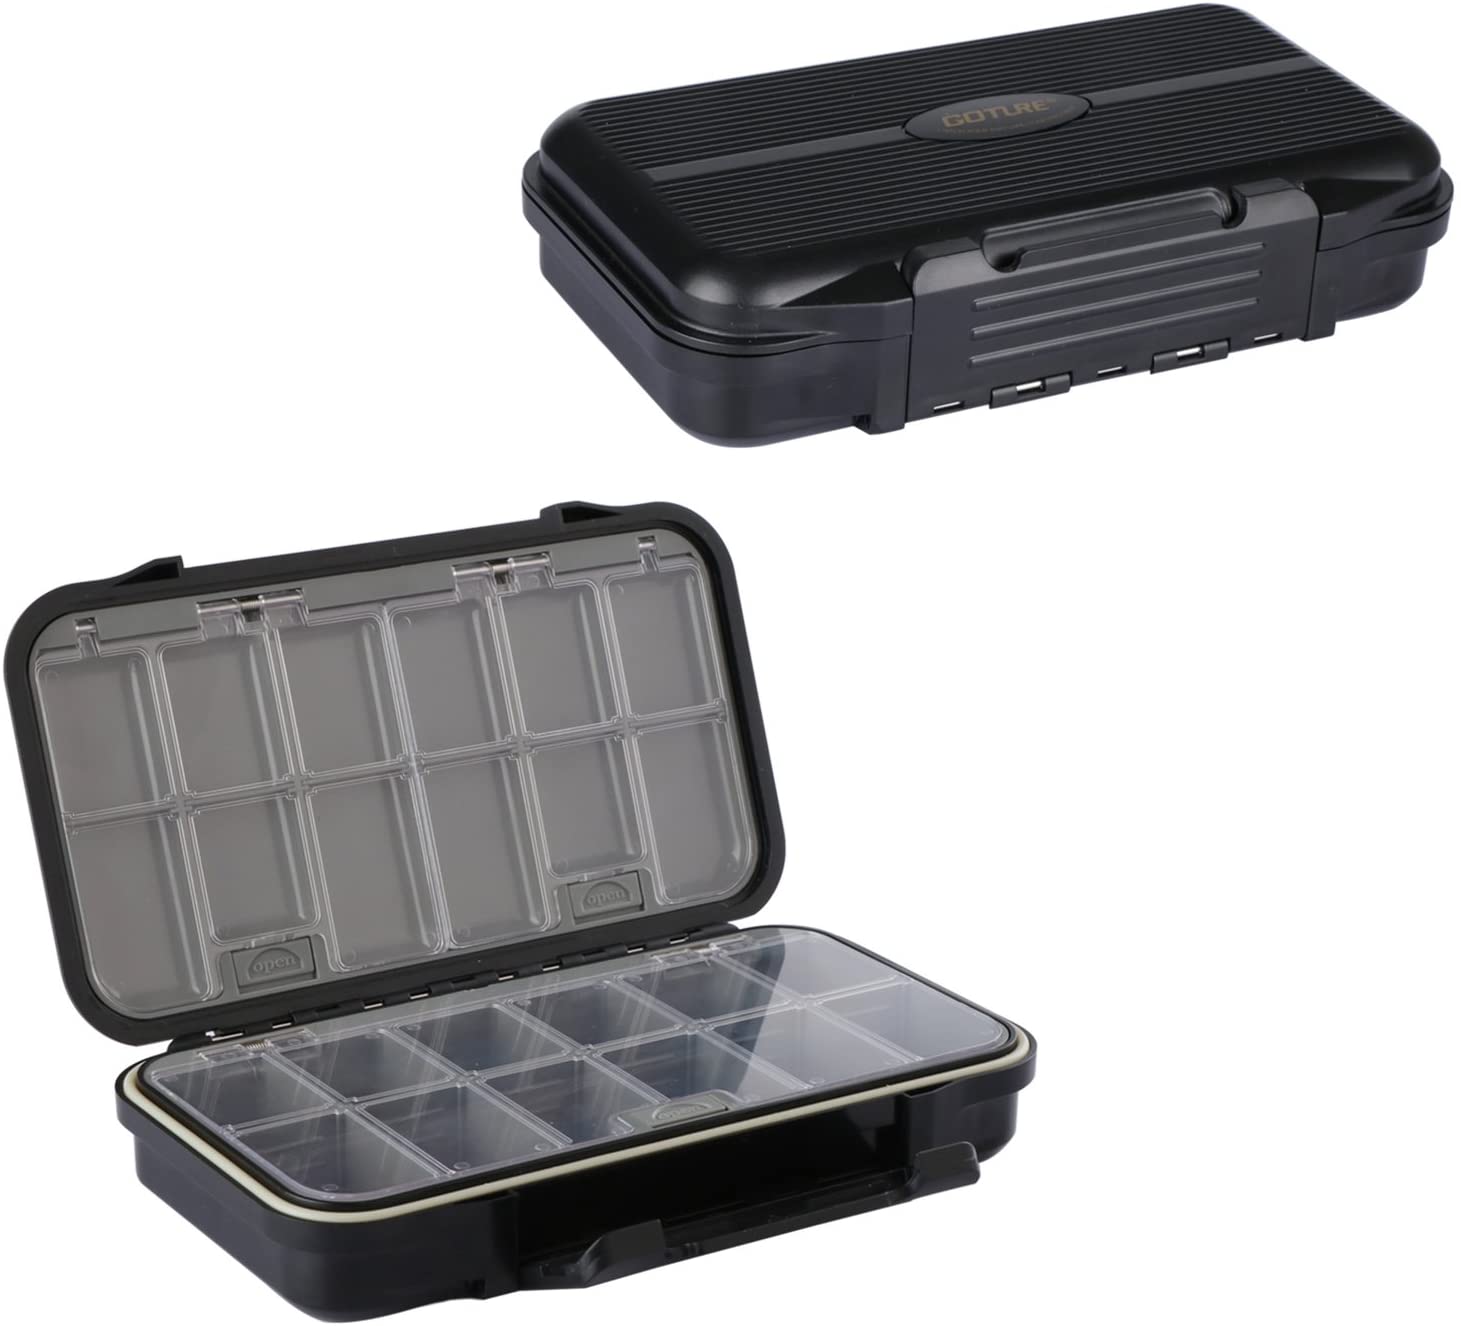 Goture Small Tackle Box, Black Waterproof 2 Sided Adjustable Fishing Lure  Tackle Boxes - Large